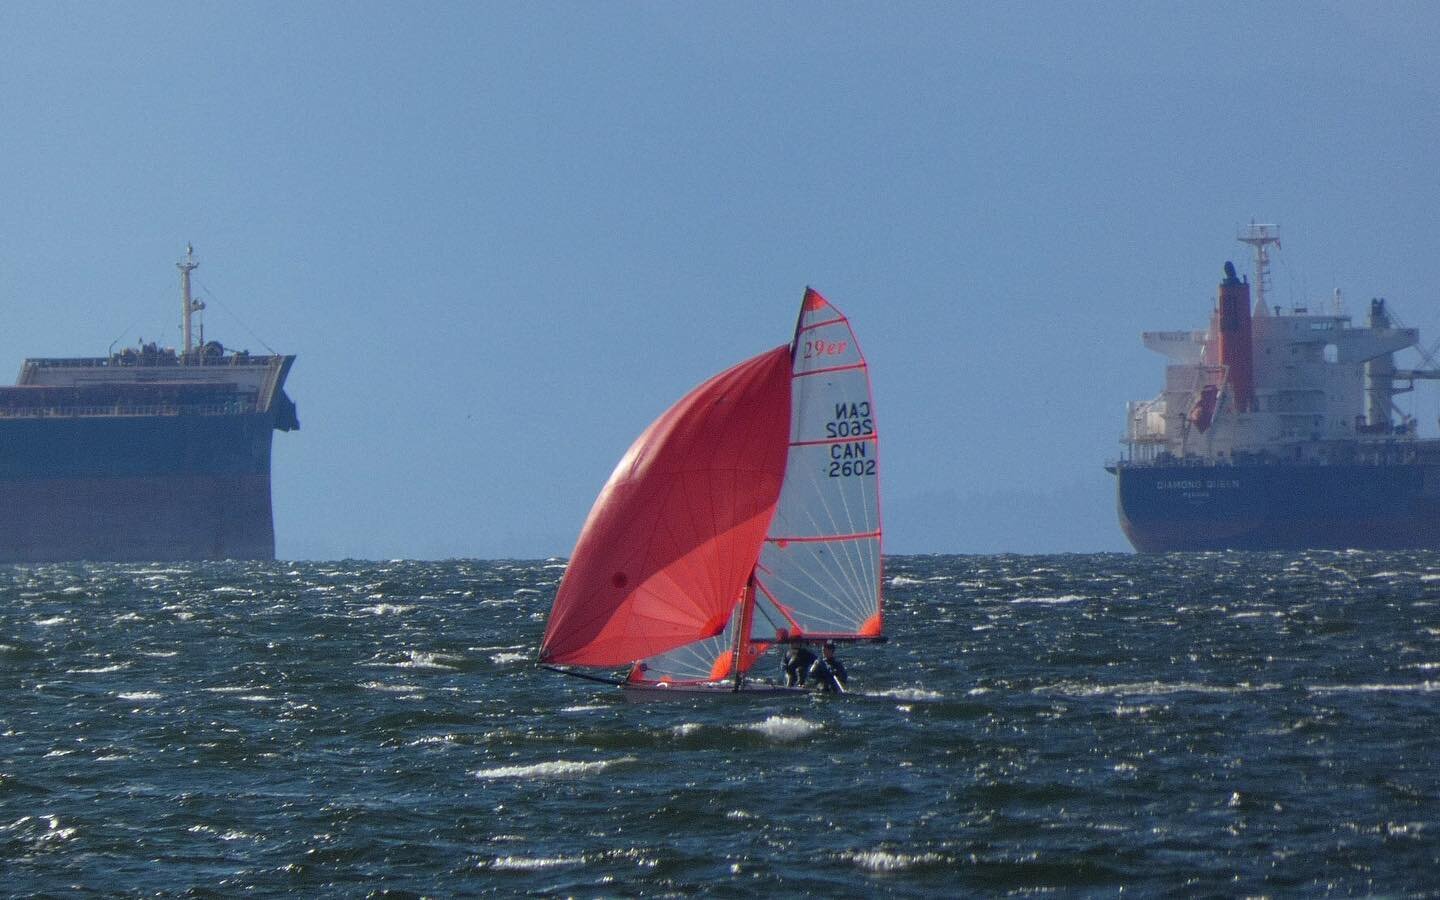 There&rsquo;s two types of Zoom in 2020: The audio visual software, and our 29ers 😎

#hollyburnsailingclub #29er #zoom #windy #fast #spinnaker #sailing #ambleside